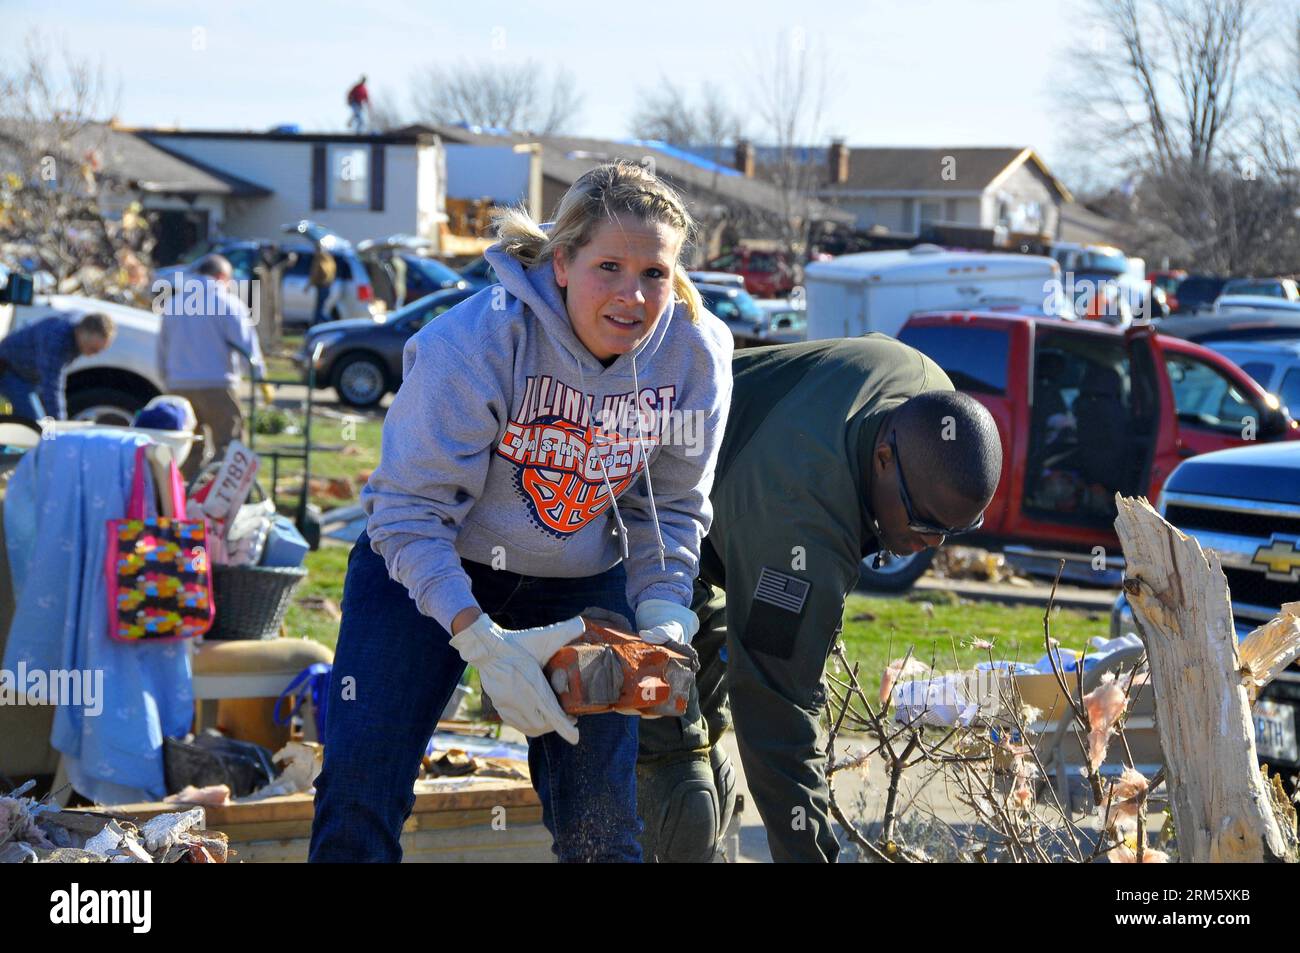 Bildnummer: 60732981  Datum: 19.11.2013  Copyright: imago/Xinhua ILLINOIS, Nov. 19, 2013 (Xinhua) -- Local residents work in ruins after a tornado attack in the town of Washington in Illinois, the United States, on Nov. 19, 2013. At least 16 were killed during tornado attacks on Sunday, according to the National Weather Service. (Xinhua/Zhang Baoping)(ybg) US-ILLINOIS-TORNADO PUBLICATIONxNOTxINxCHN Gesellschaft USA Naturkatastrophe x0x xsk 2013 quer Aufmacher premiumd     60732981 Date 19 11 2013 Copyright Imago XINHUA Illinois Nov 19 2013 XINHUA Local Residents Work in Ruins After a Tornado A Stock Photo